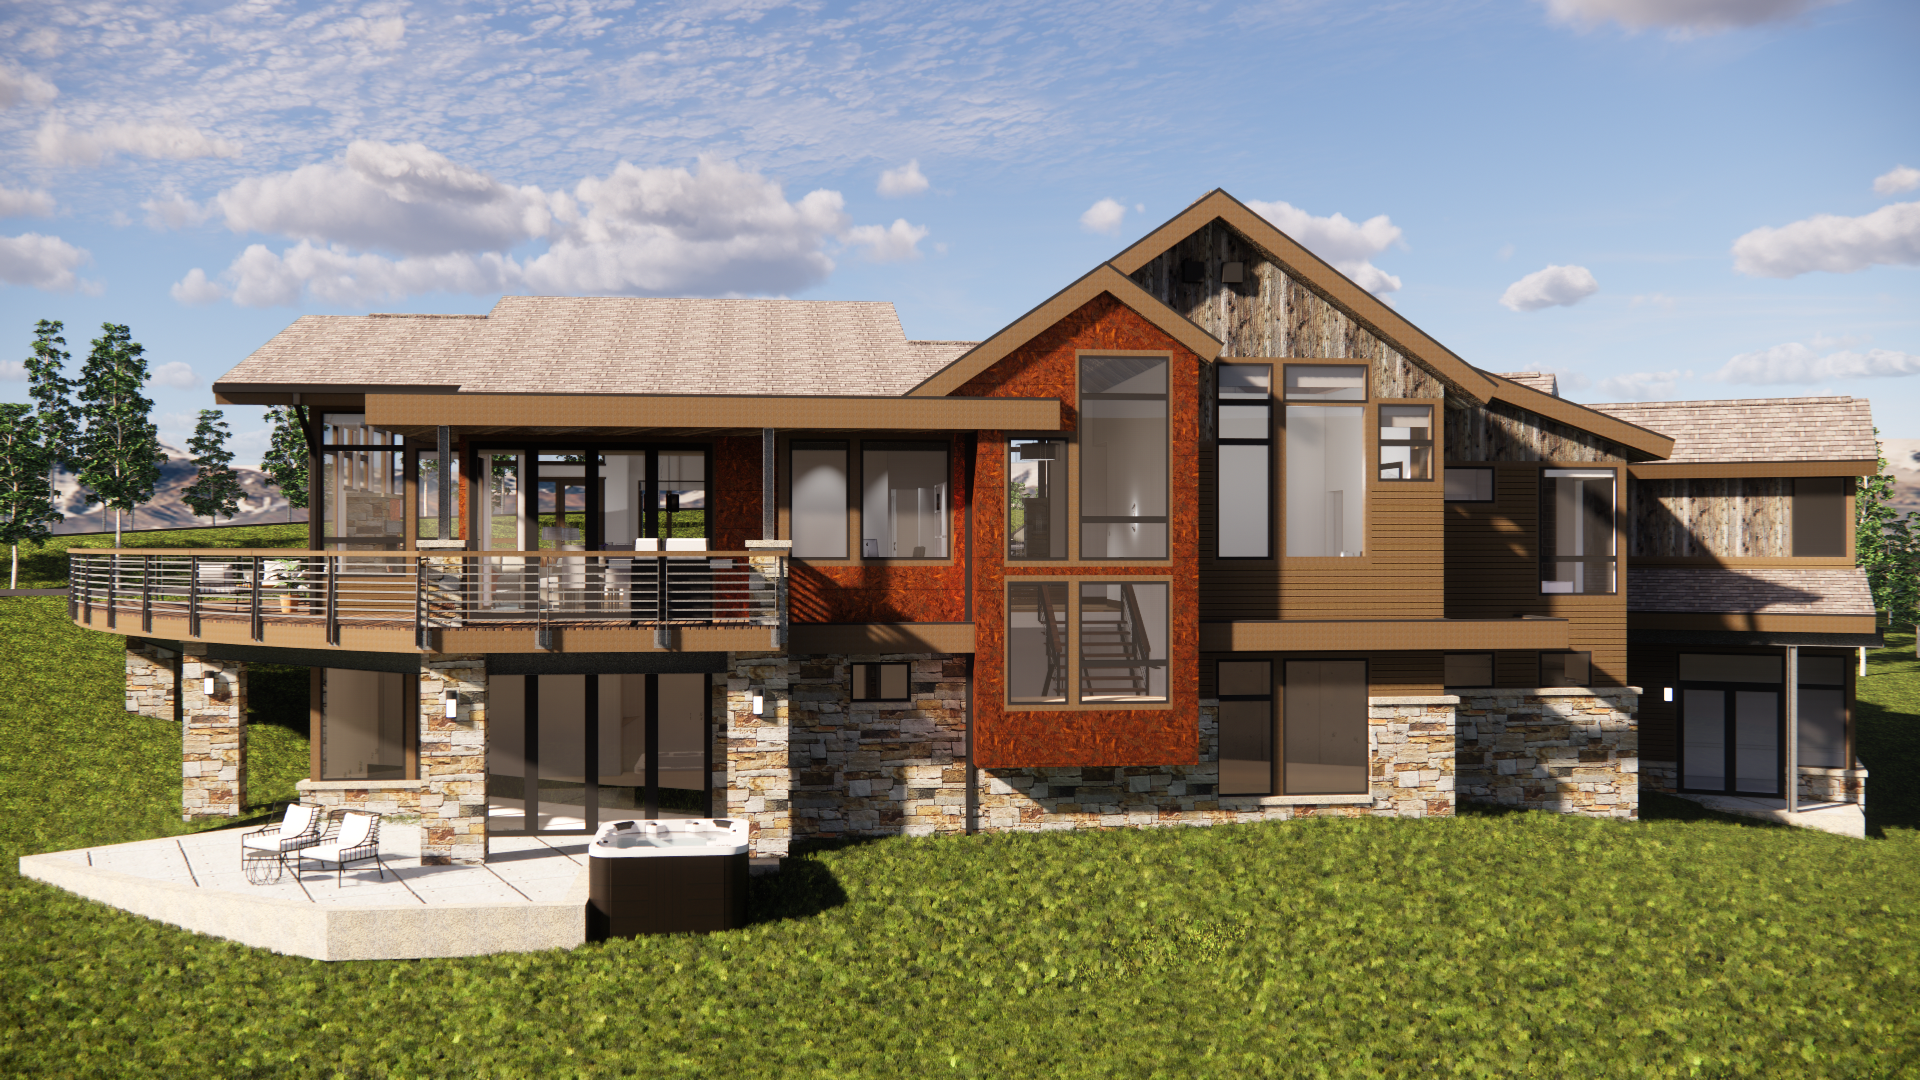 For Sale: New Construction Luxury Residence - Summit County, CO 